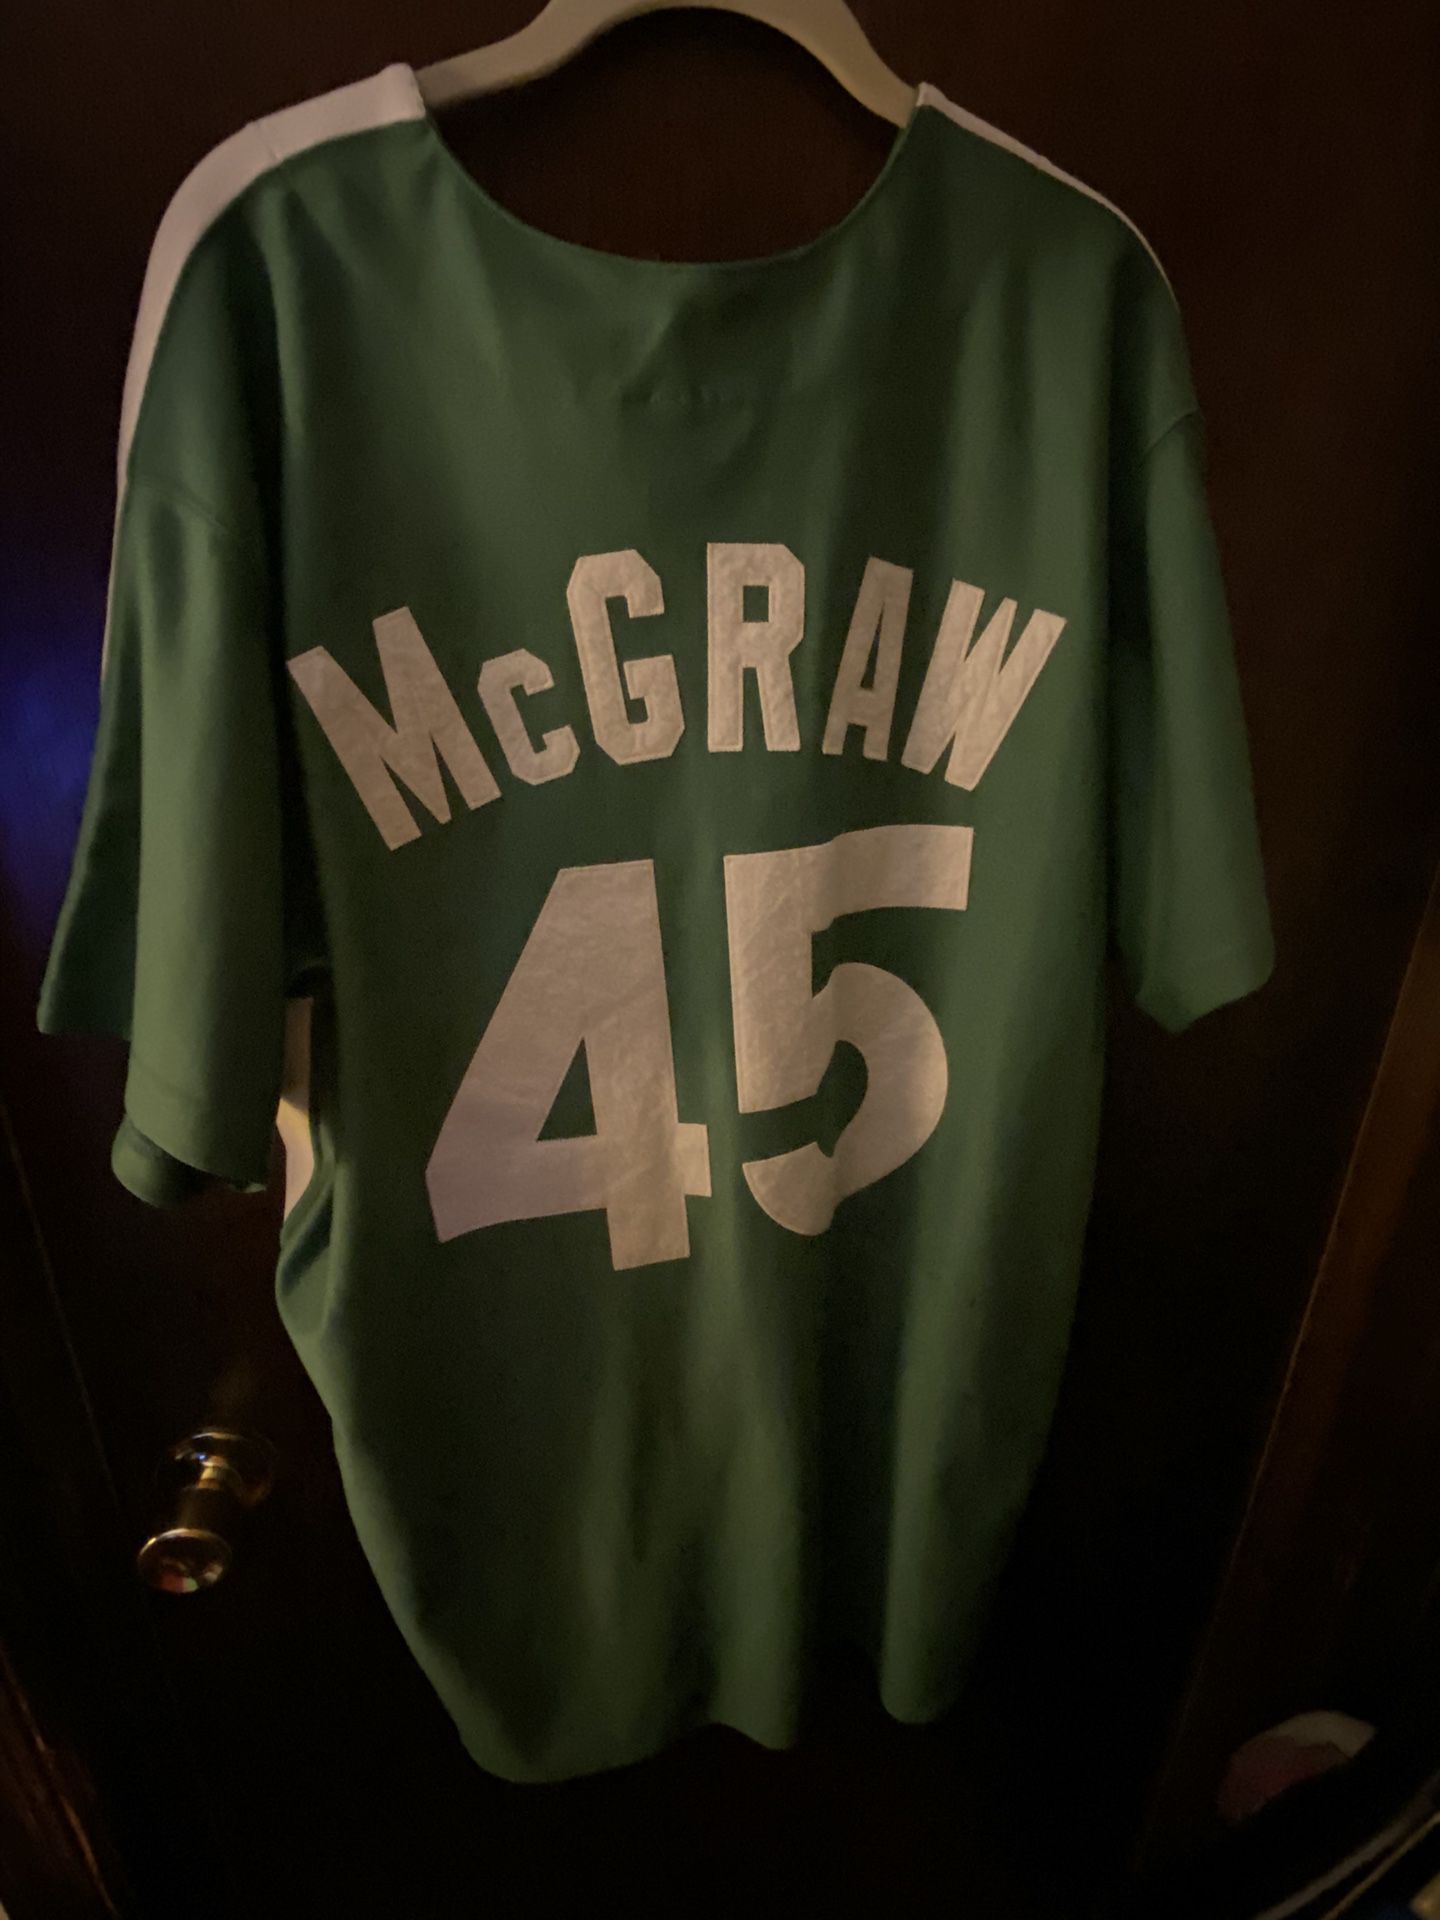 Tug McGraw Phillies Green Jersey for Sale in Southampton